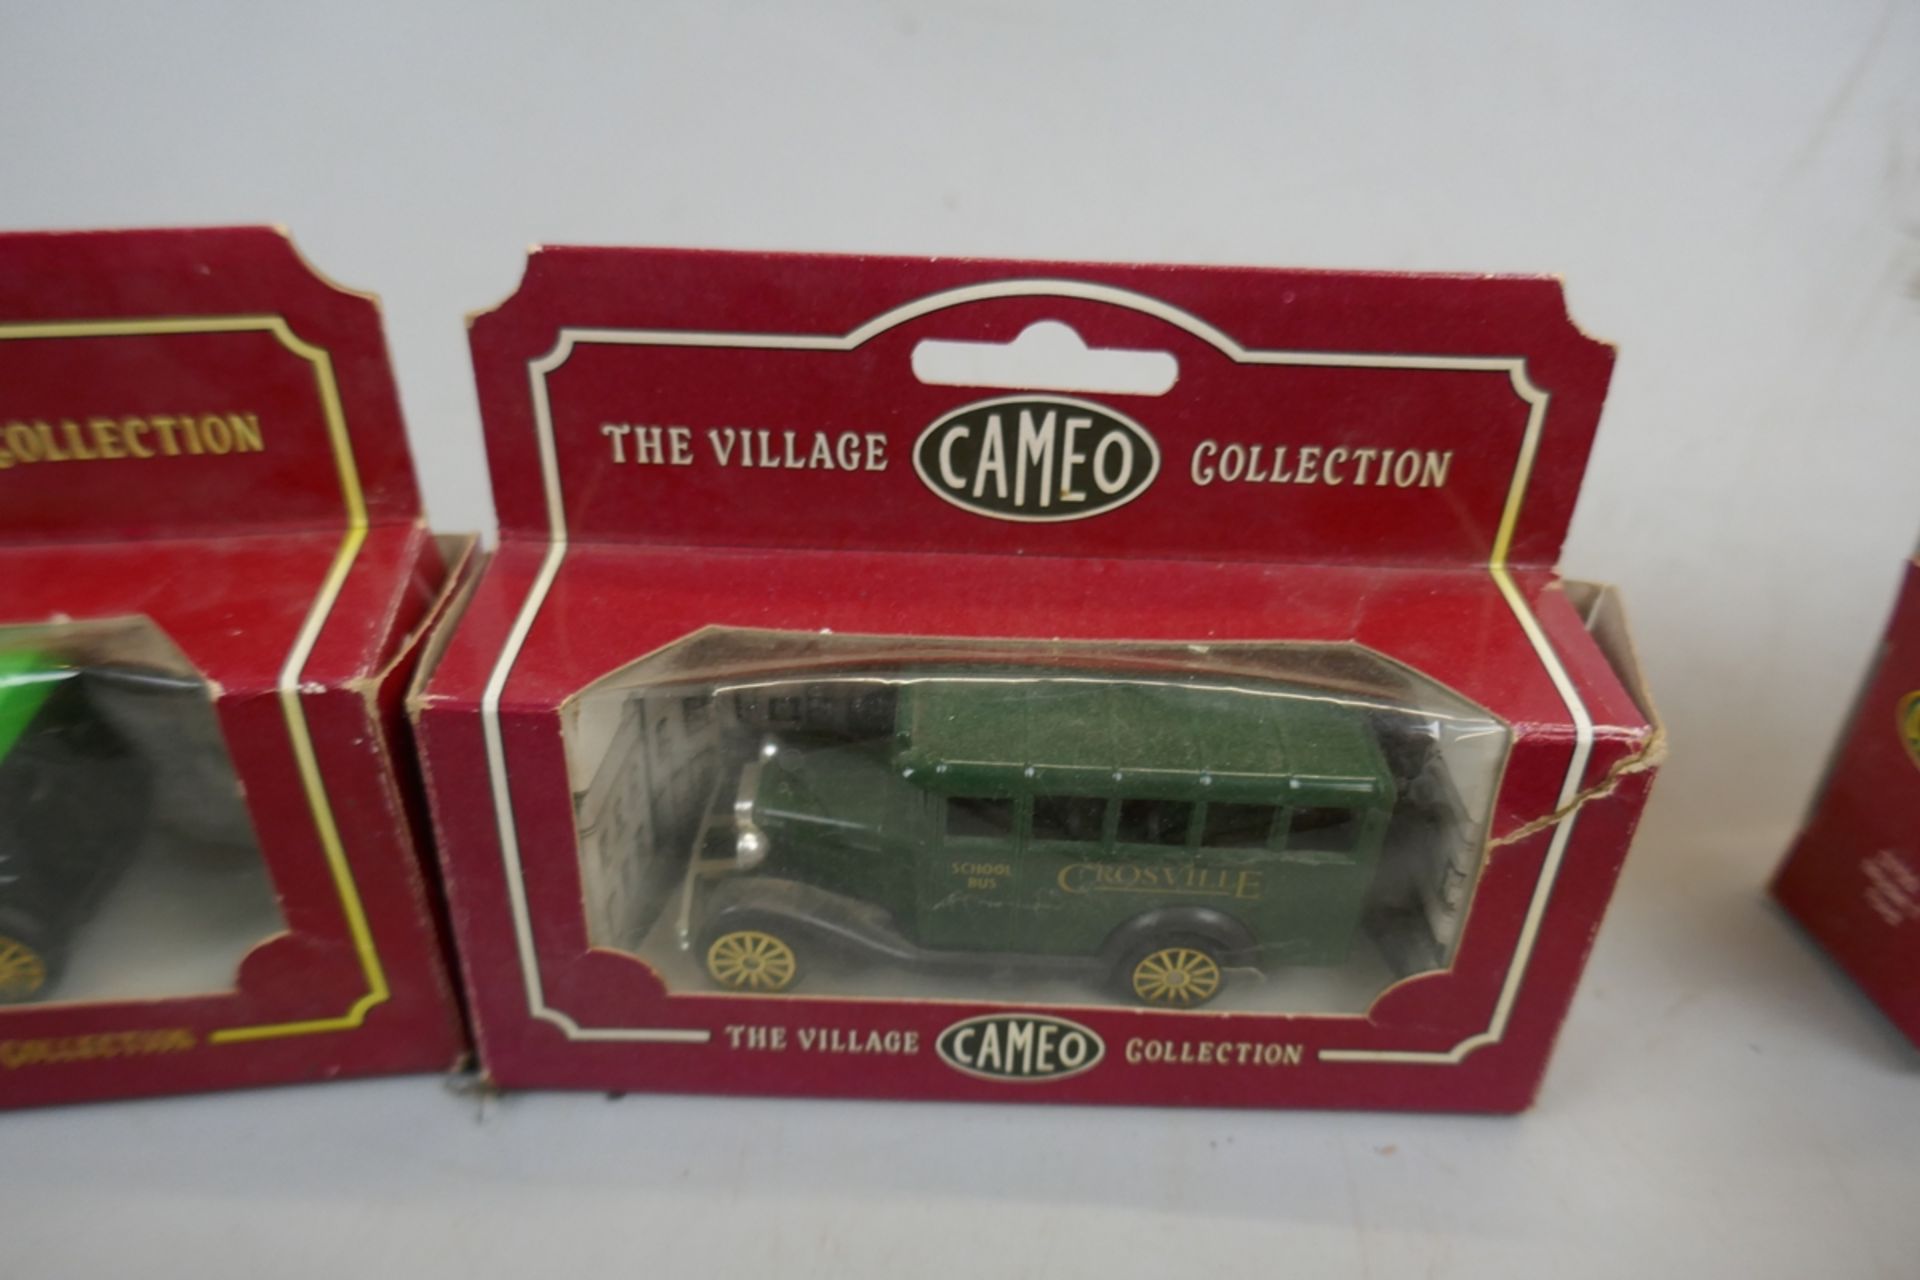 Collection of die cast model vehicles, some in original boxes - Image 12 of 13